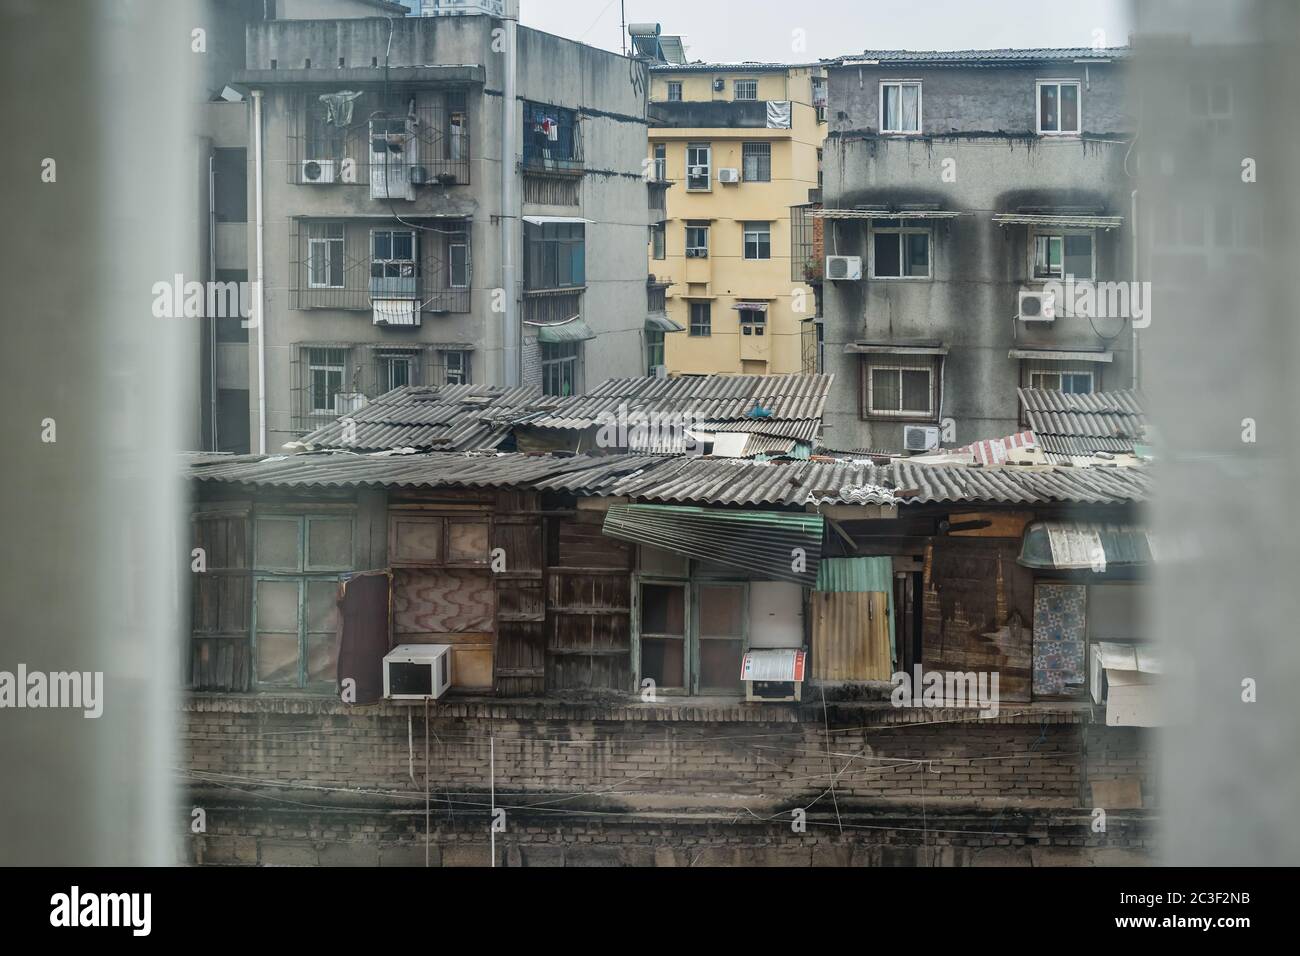 Rooftops of Yichang in China Stock Photo